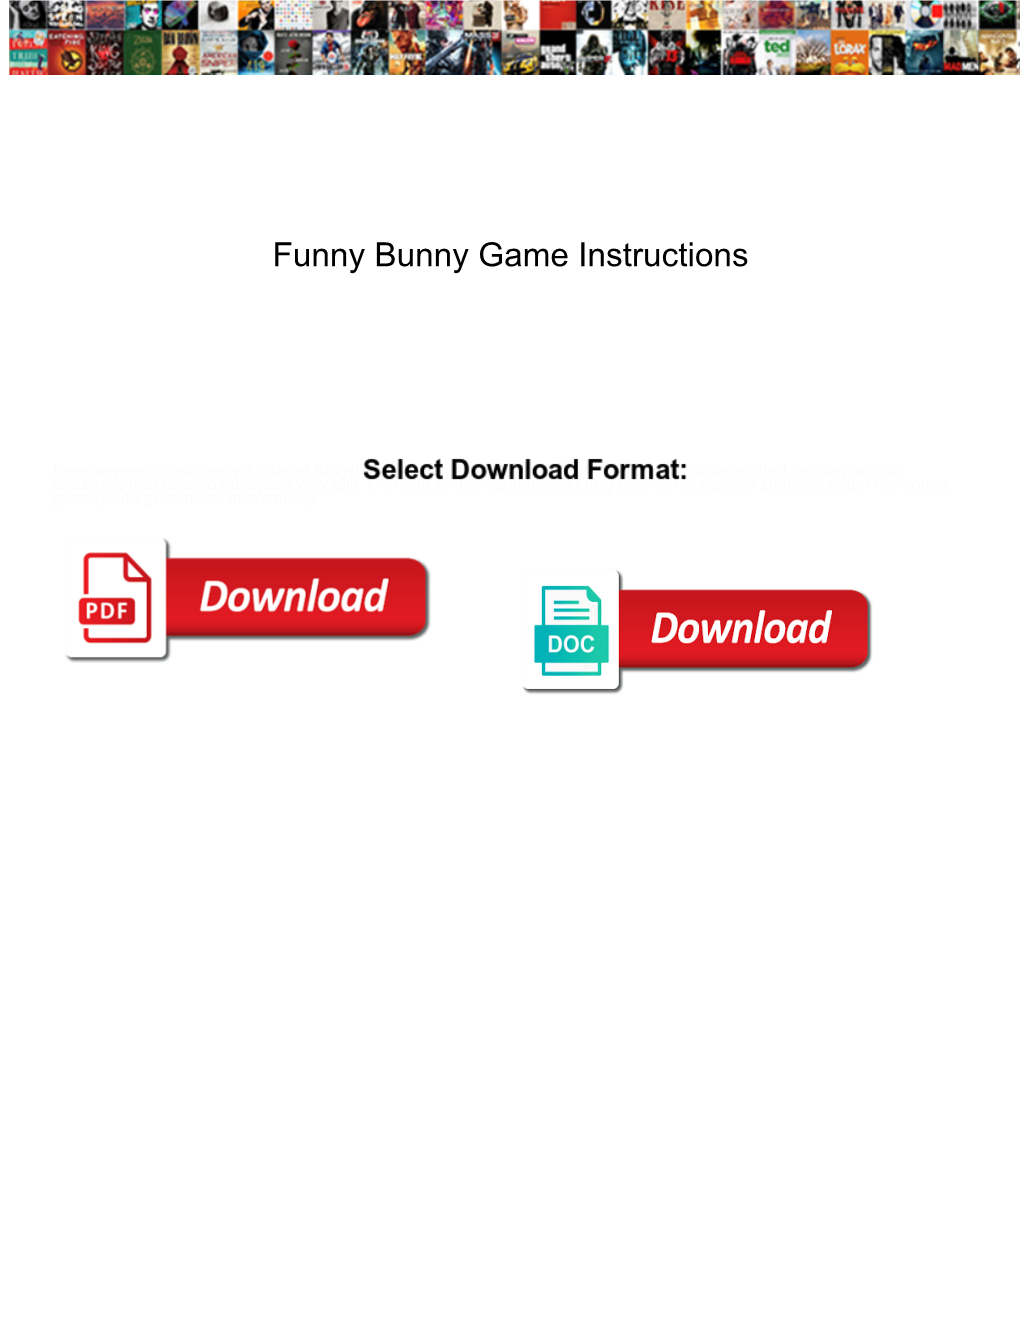 Funny Bunny Game Instructions